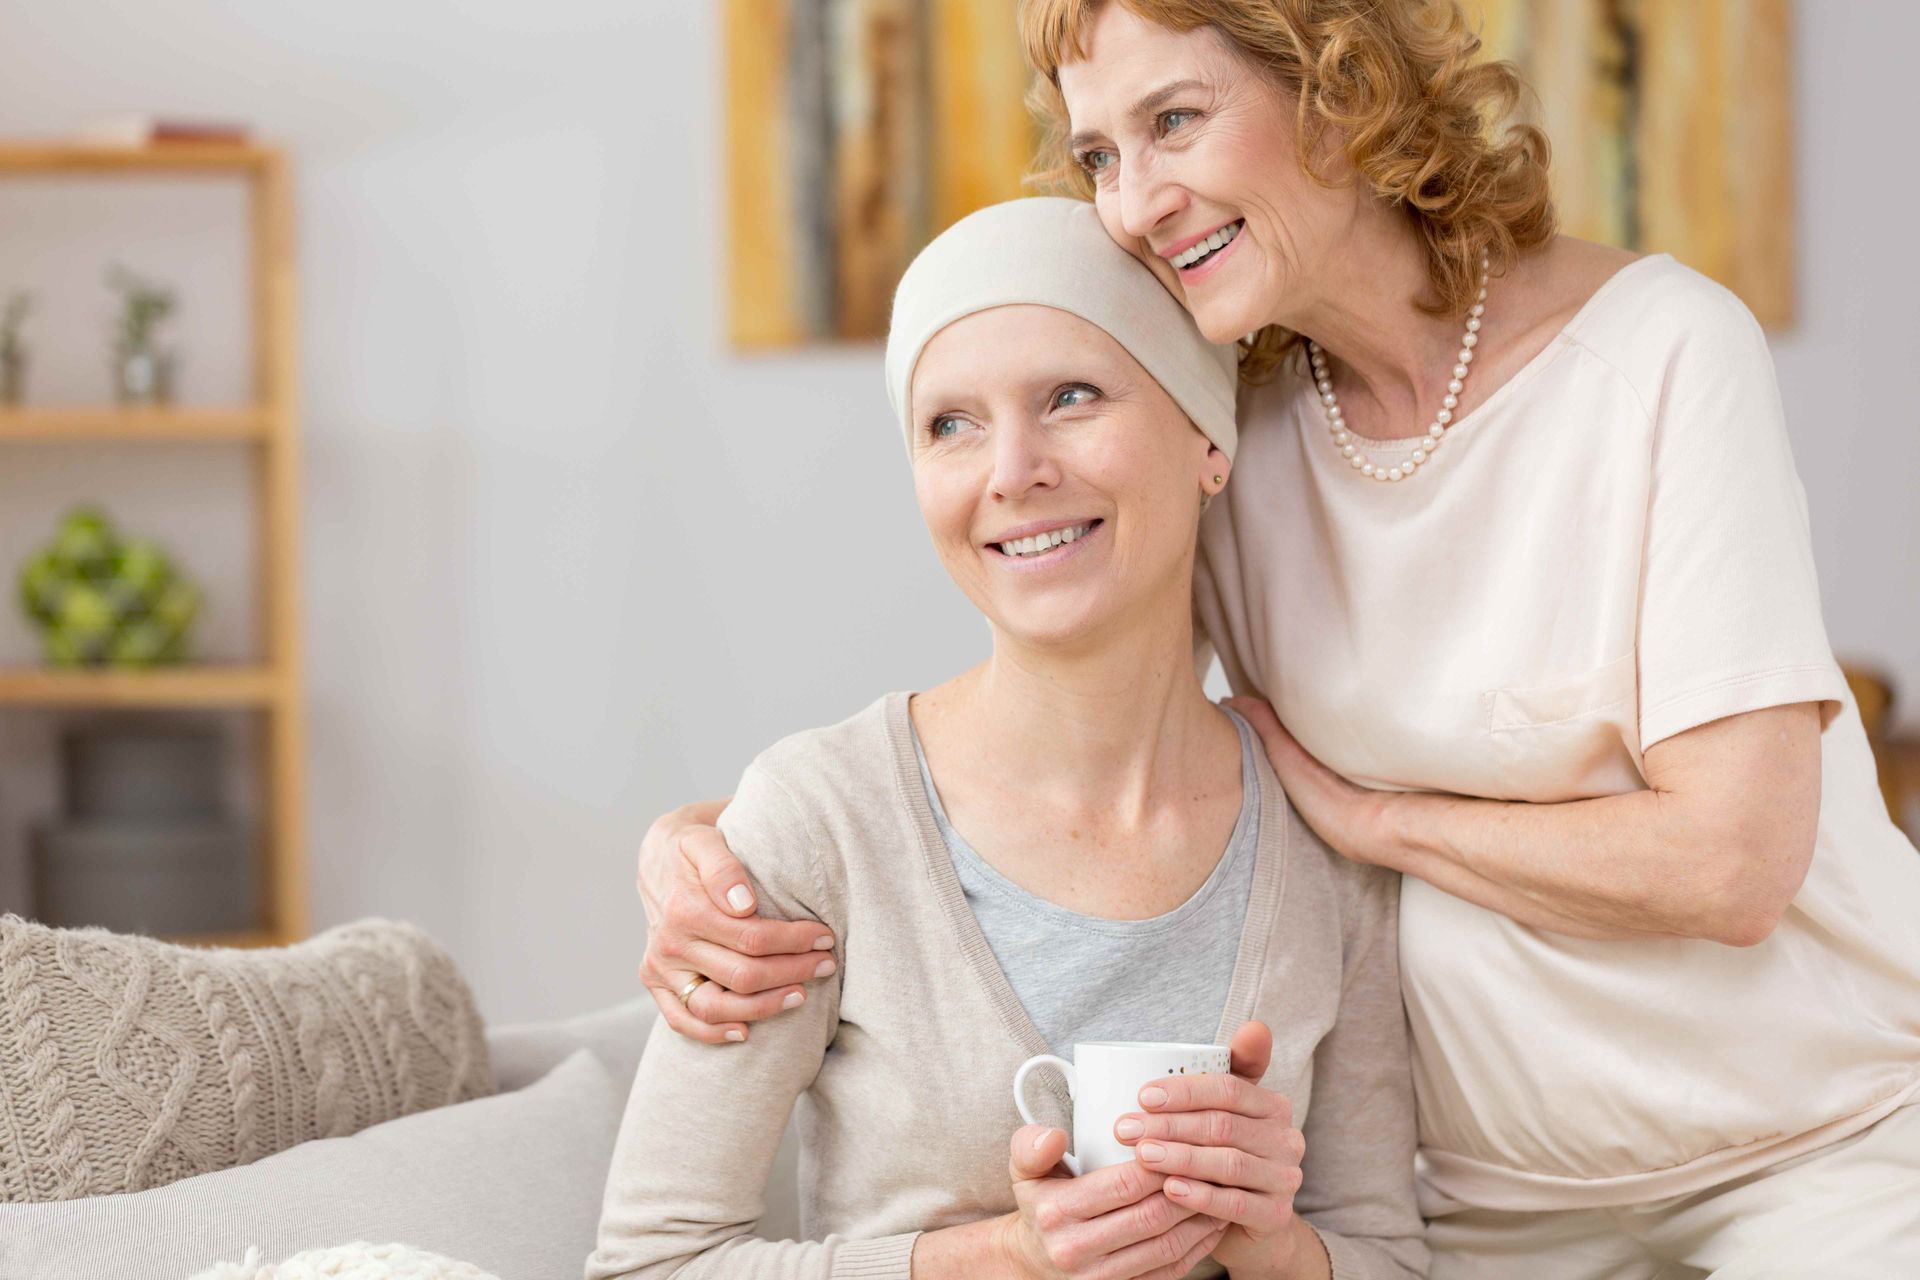 A woman with cancer is sitting on a couch with her mother